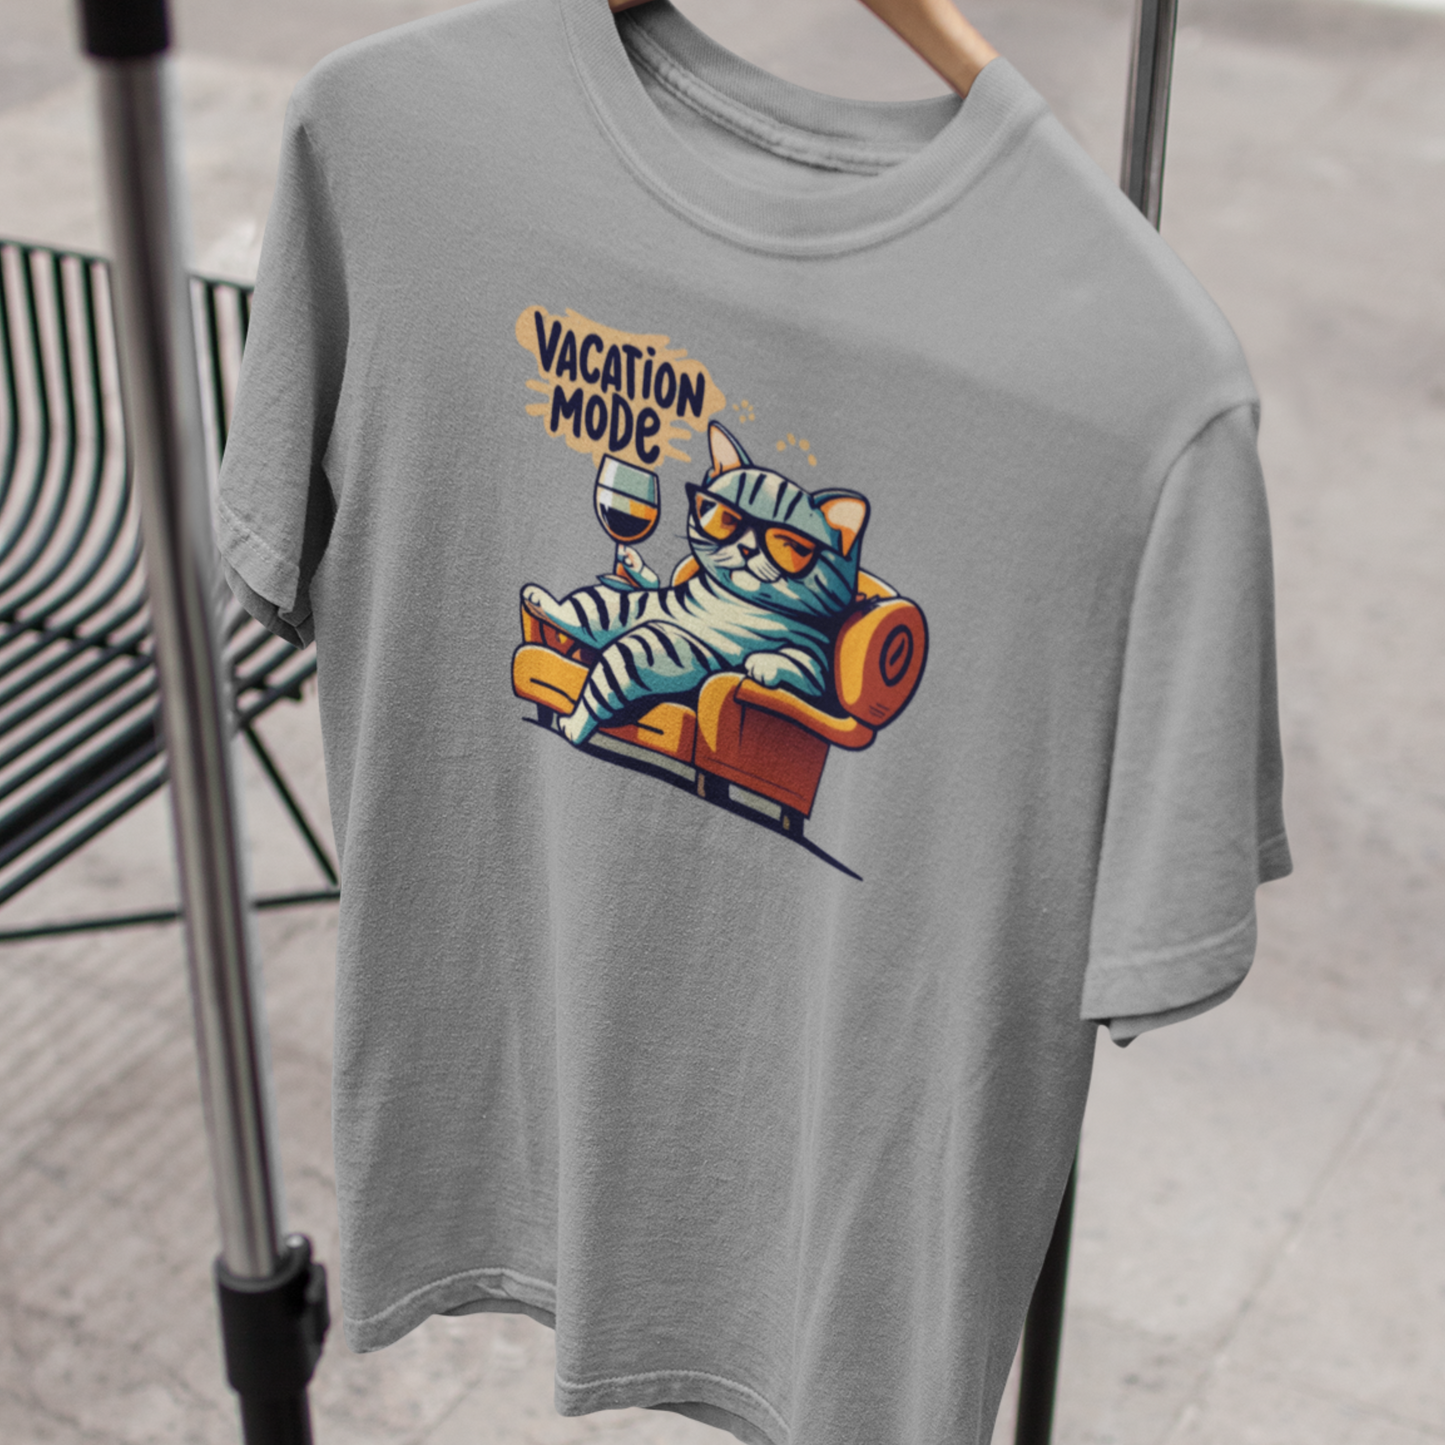 Vacation Shirt, Going on Vacation, Humerous Holiday T-Shirt, Vaction Mode, Holiday Gift, Vacation Gift